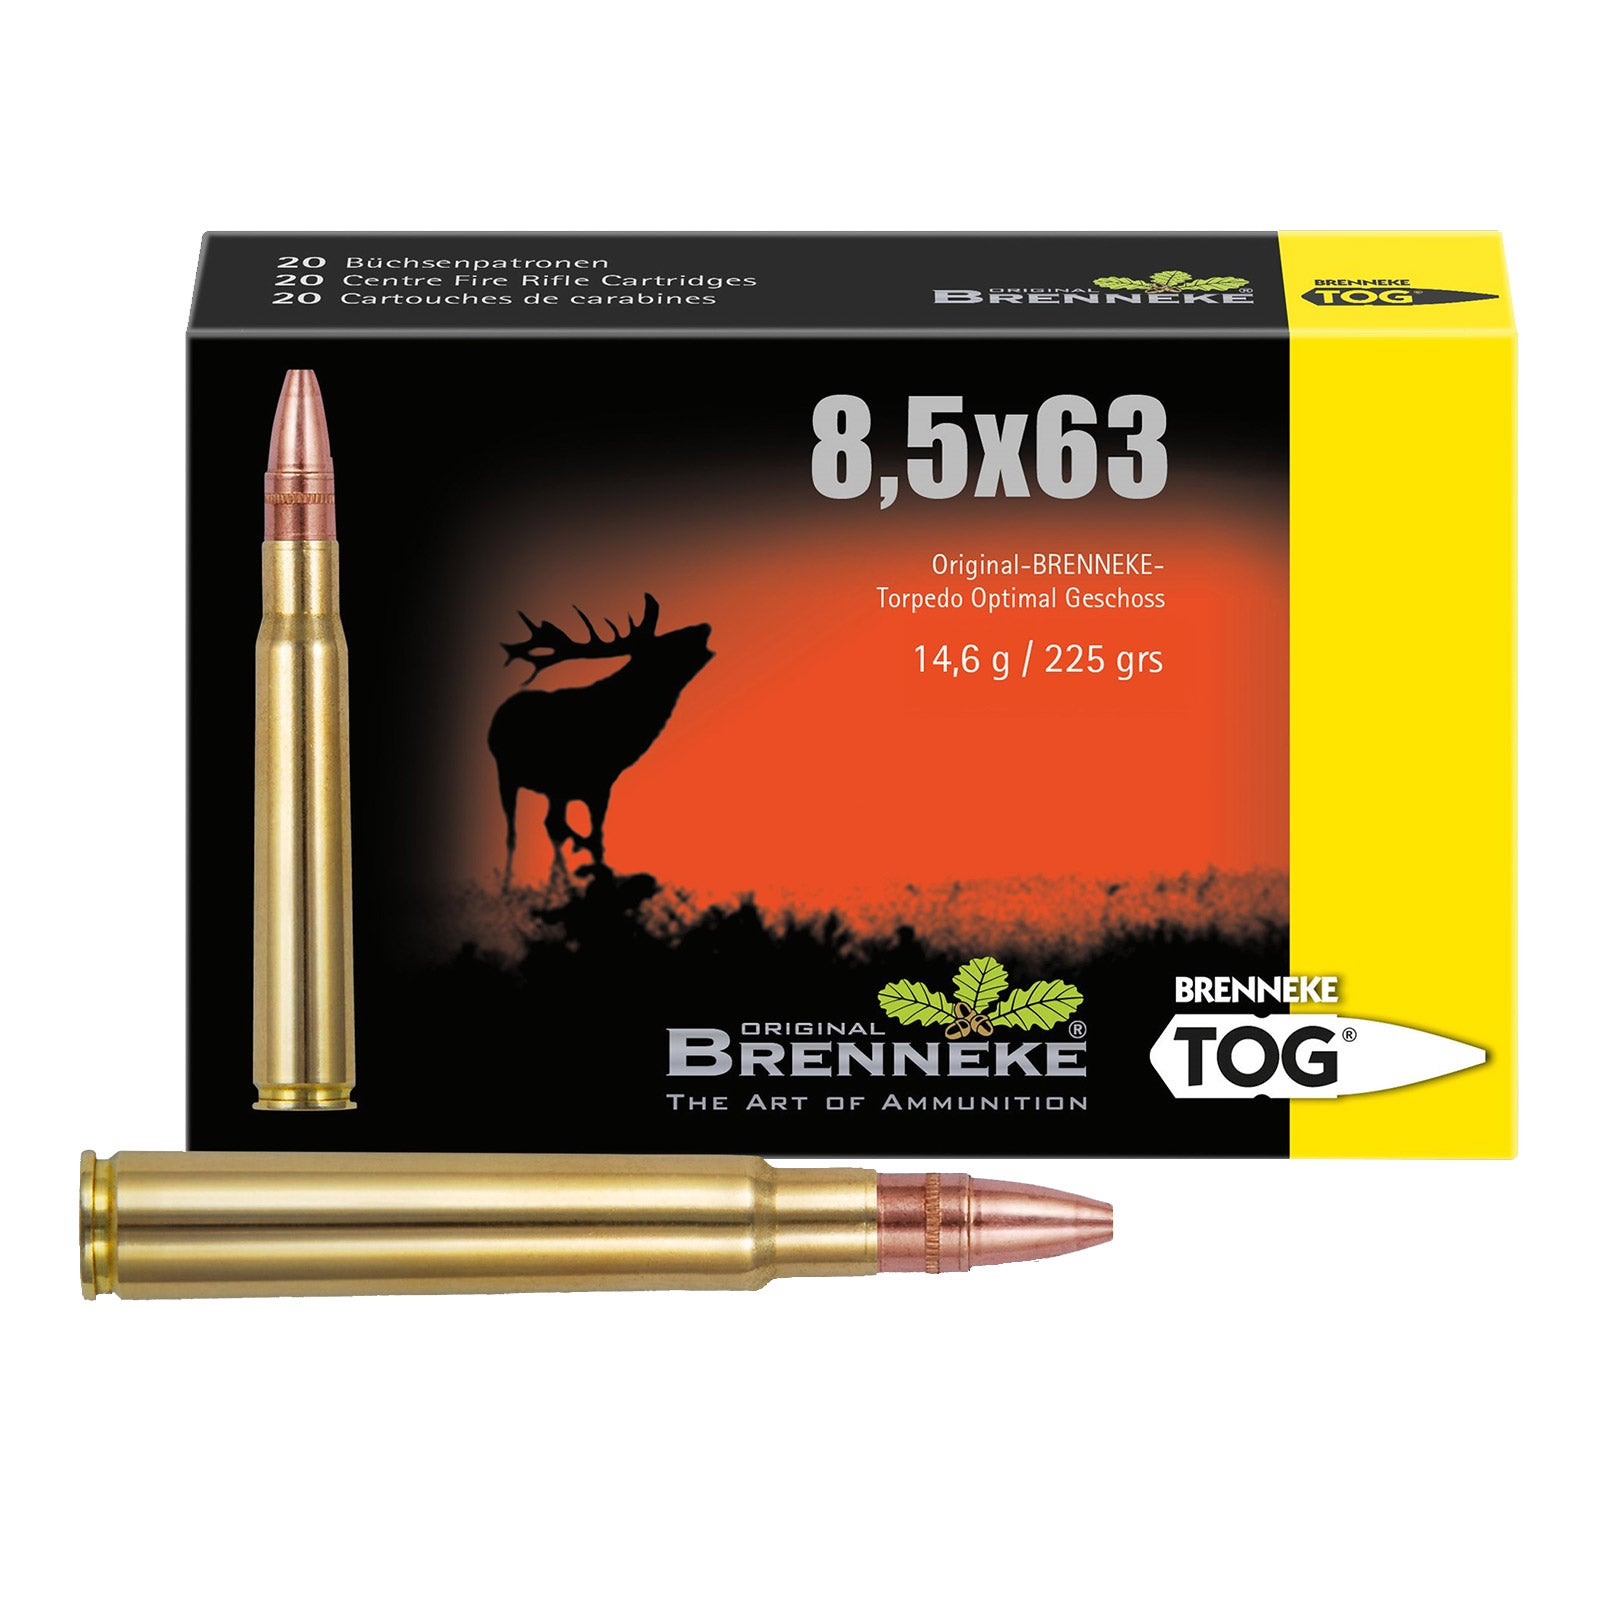  8.5x63 Review: Pros and cons of the 8.5x63